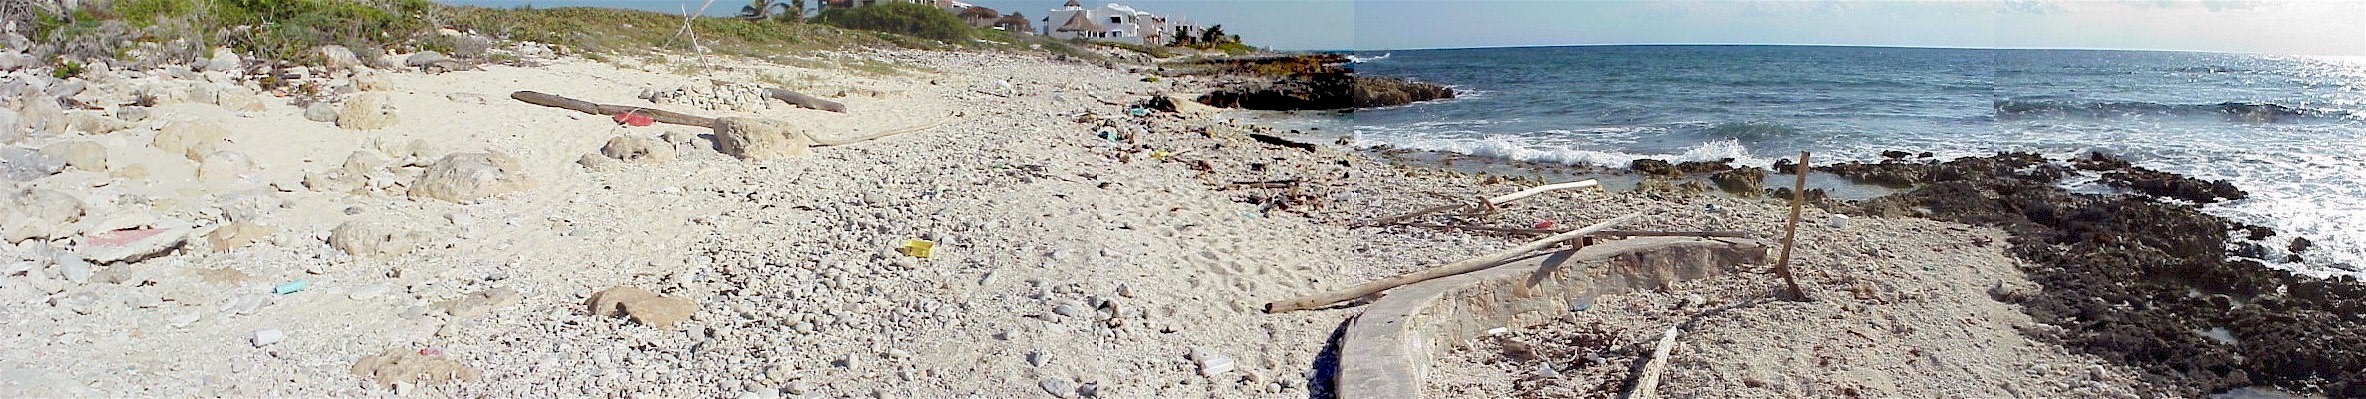 Panorama 180  of beach looking up from neighbor to south.jpg (470880 bytes)